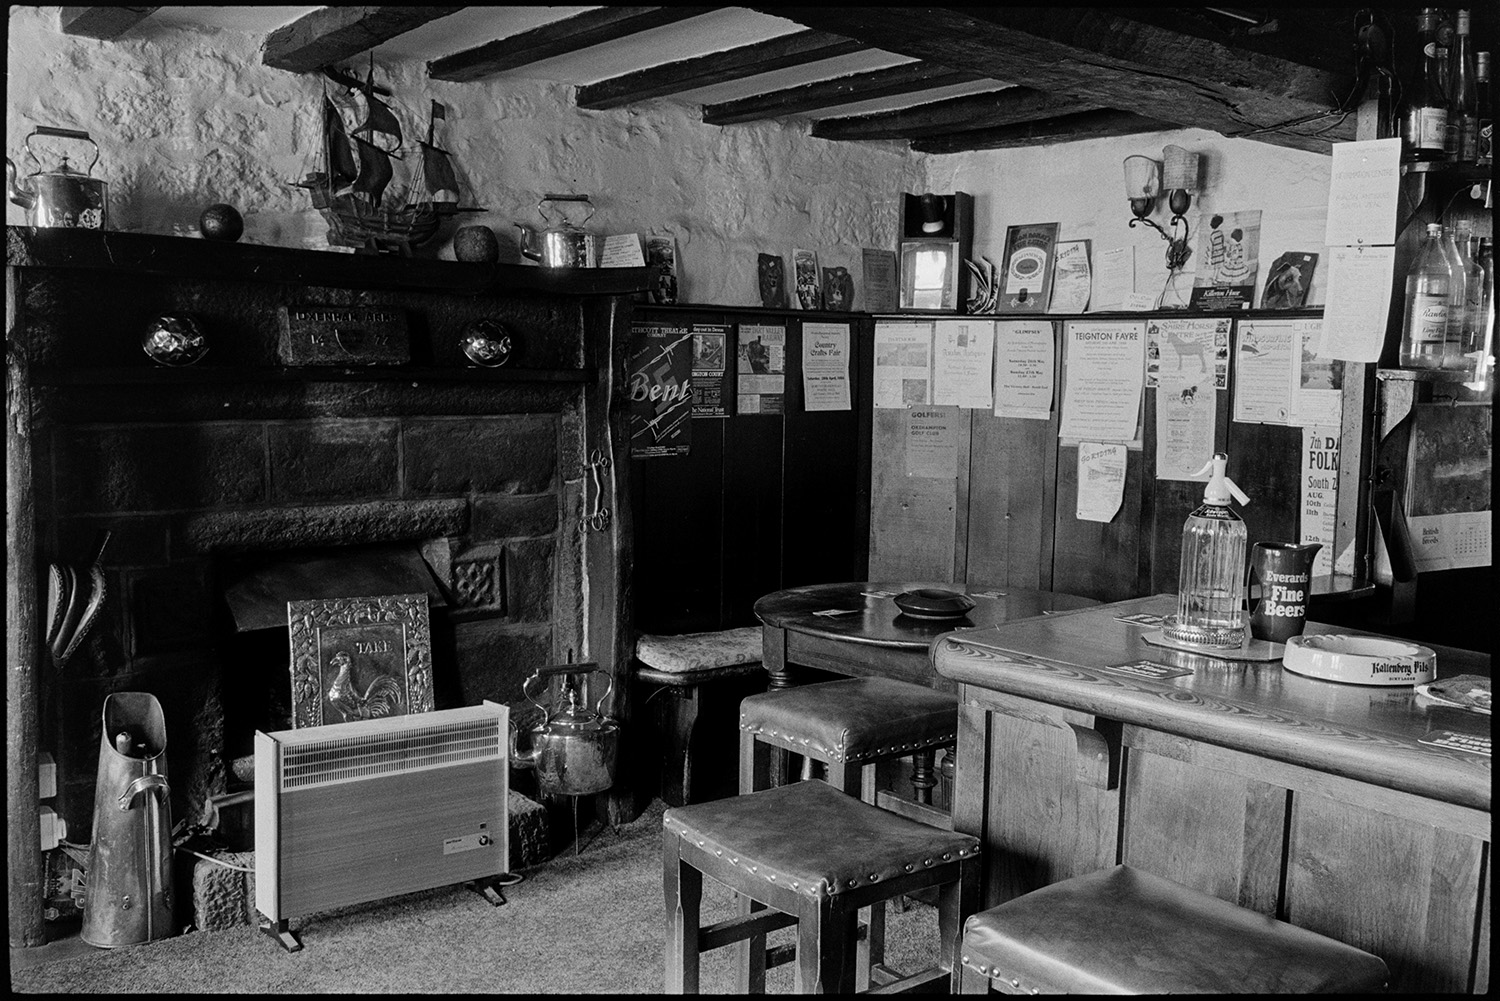 Woman ironing in pub sitting room with Television, fireplace, pub bar.
[A fireplace with electric heater and corner of the bar at the Kings Arms, South Zeal. Posters are displayed in a settle next to the bar and various ornaments are around the fireplace, including kettles and the model of a ship.]